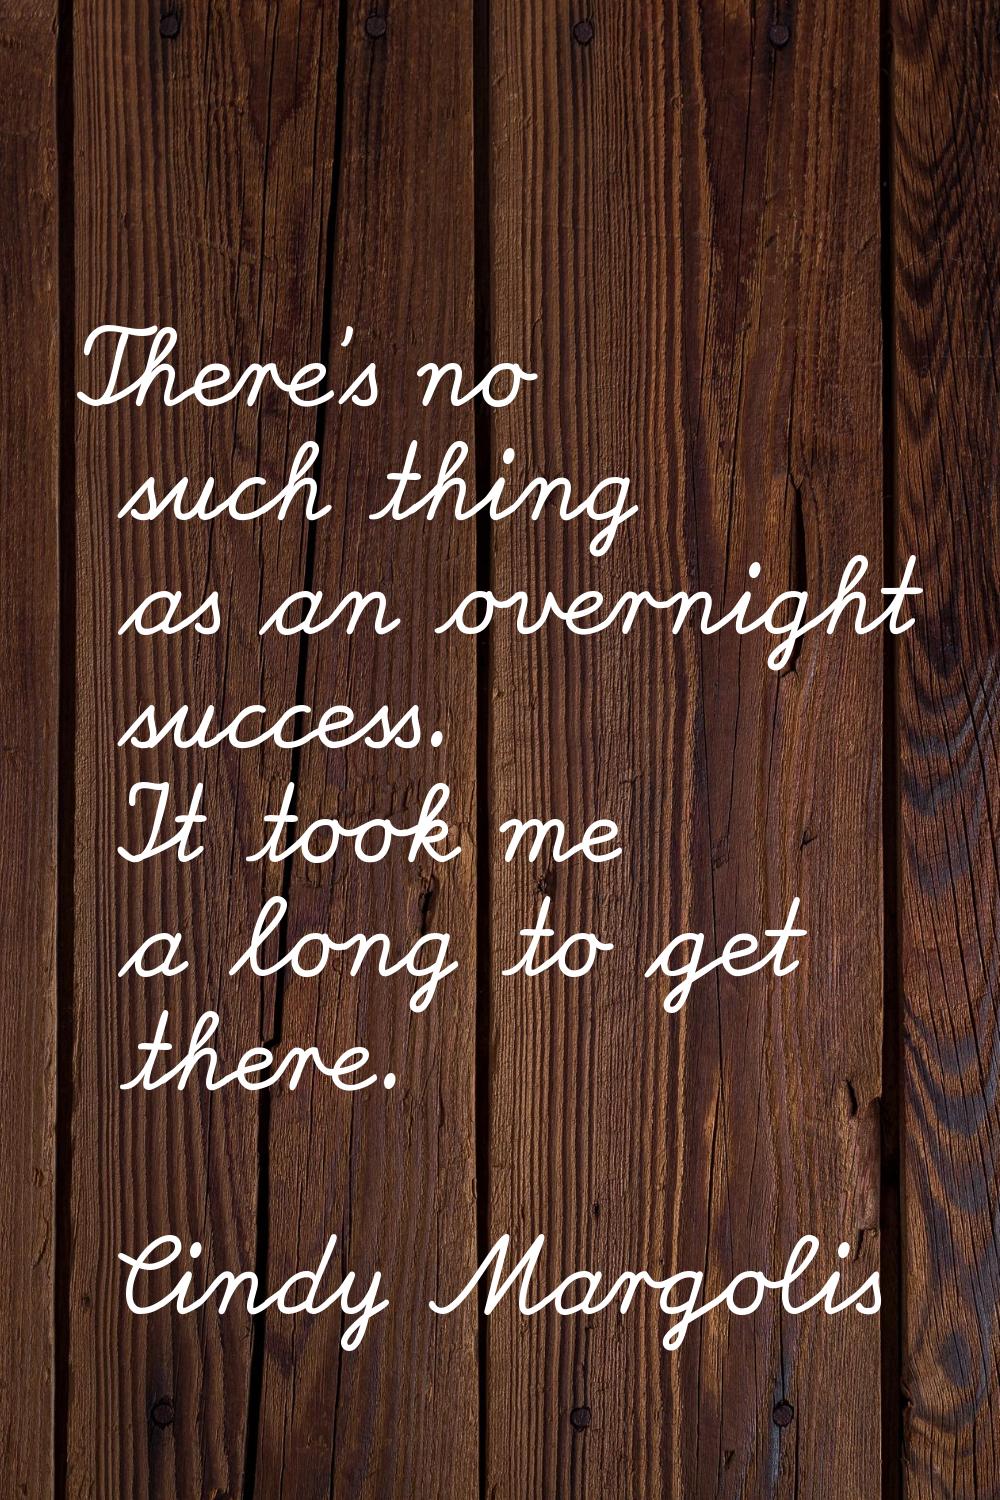 There's no such thing as an overnight success. It took me a long to get there.